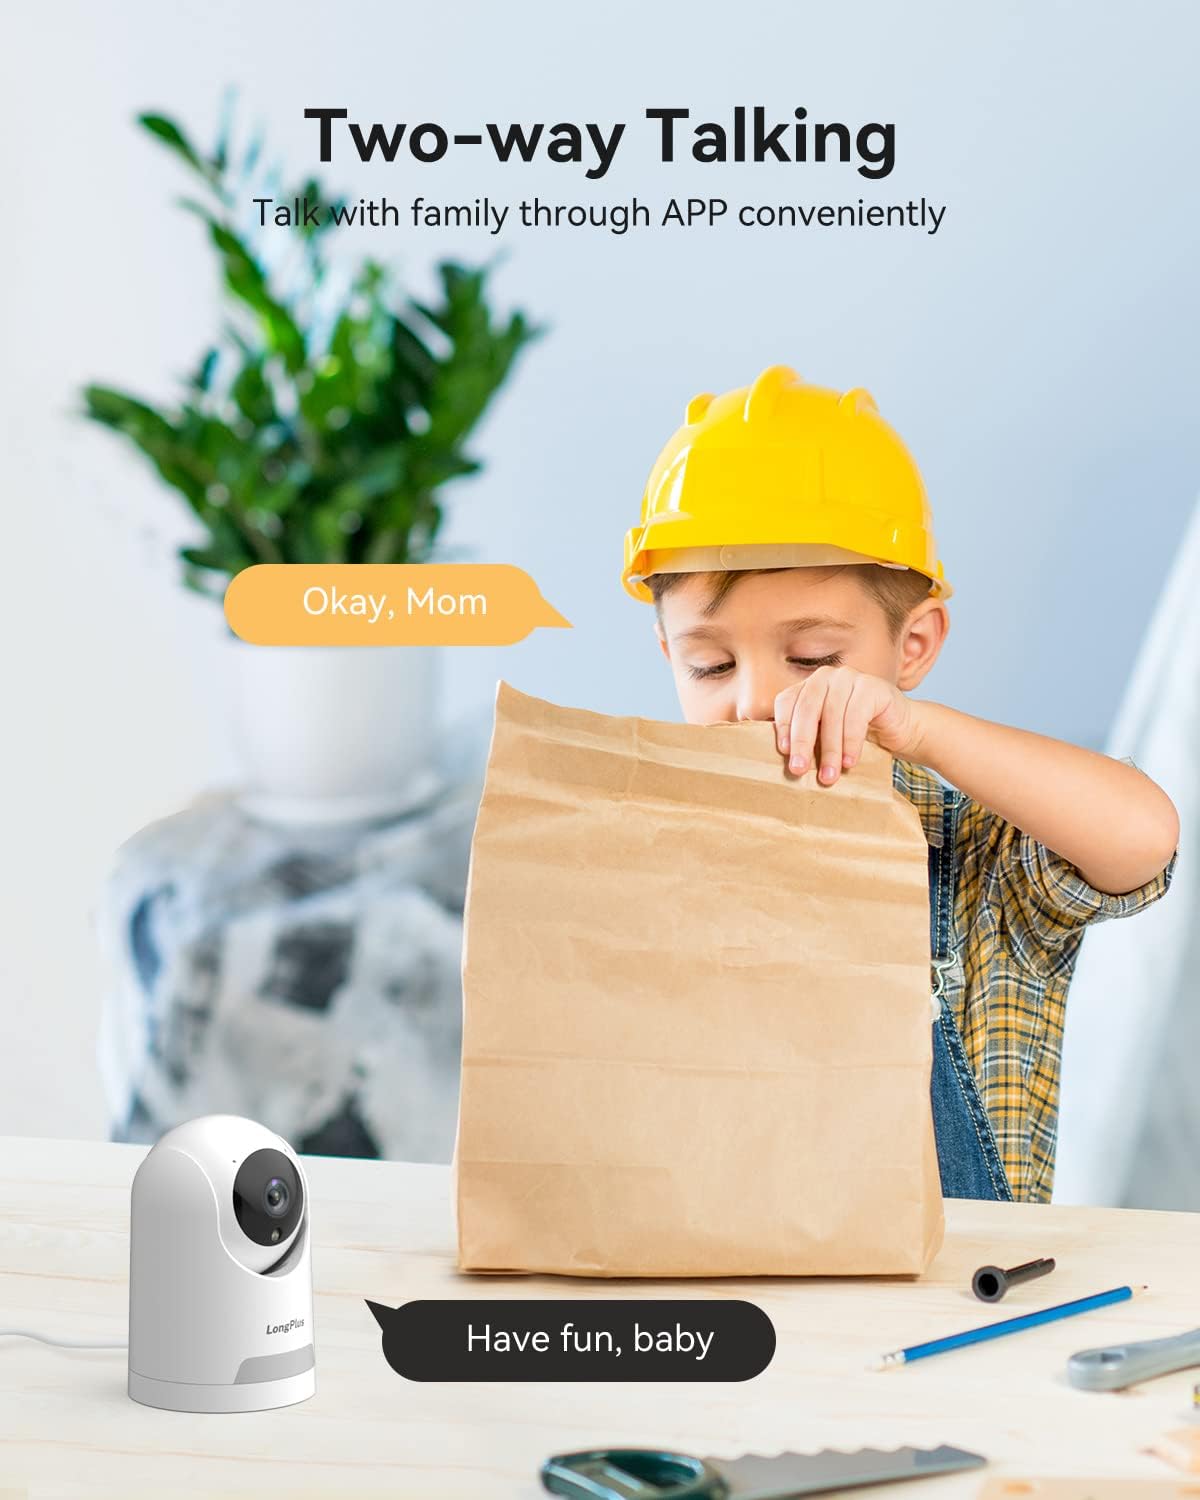 Wi-Fi Security Camera with 360-degree View, 1080P IR Night Vision, Two-Way Audio, Baby Monitor, and AI Motion Tracking.